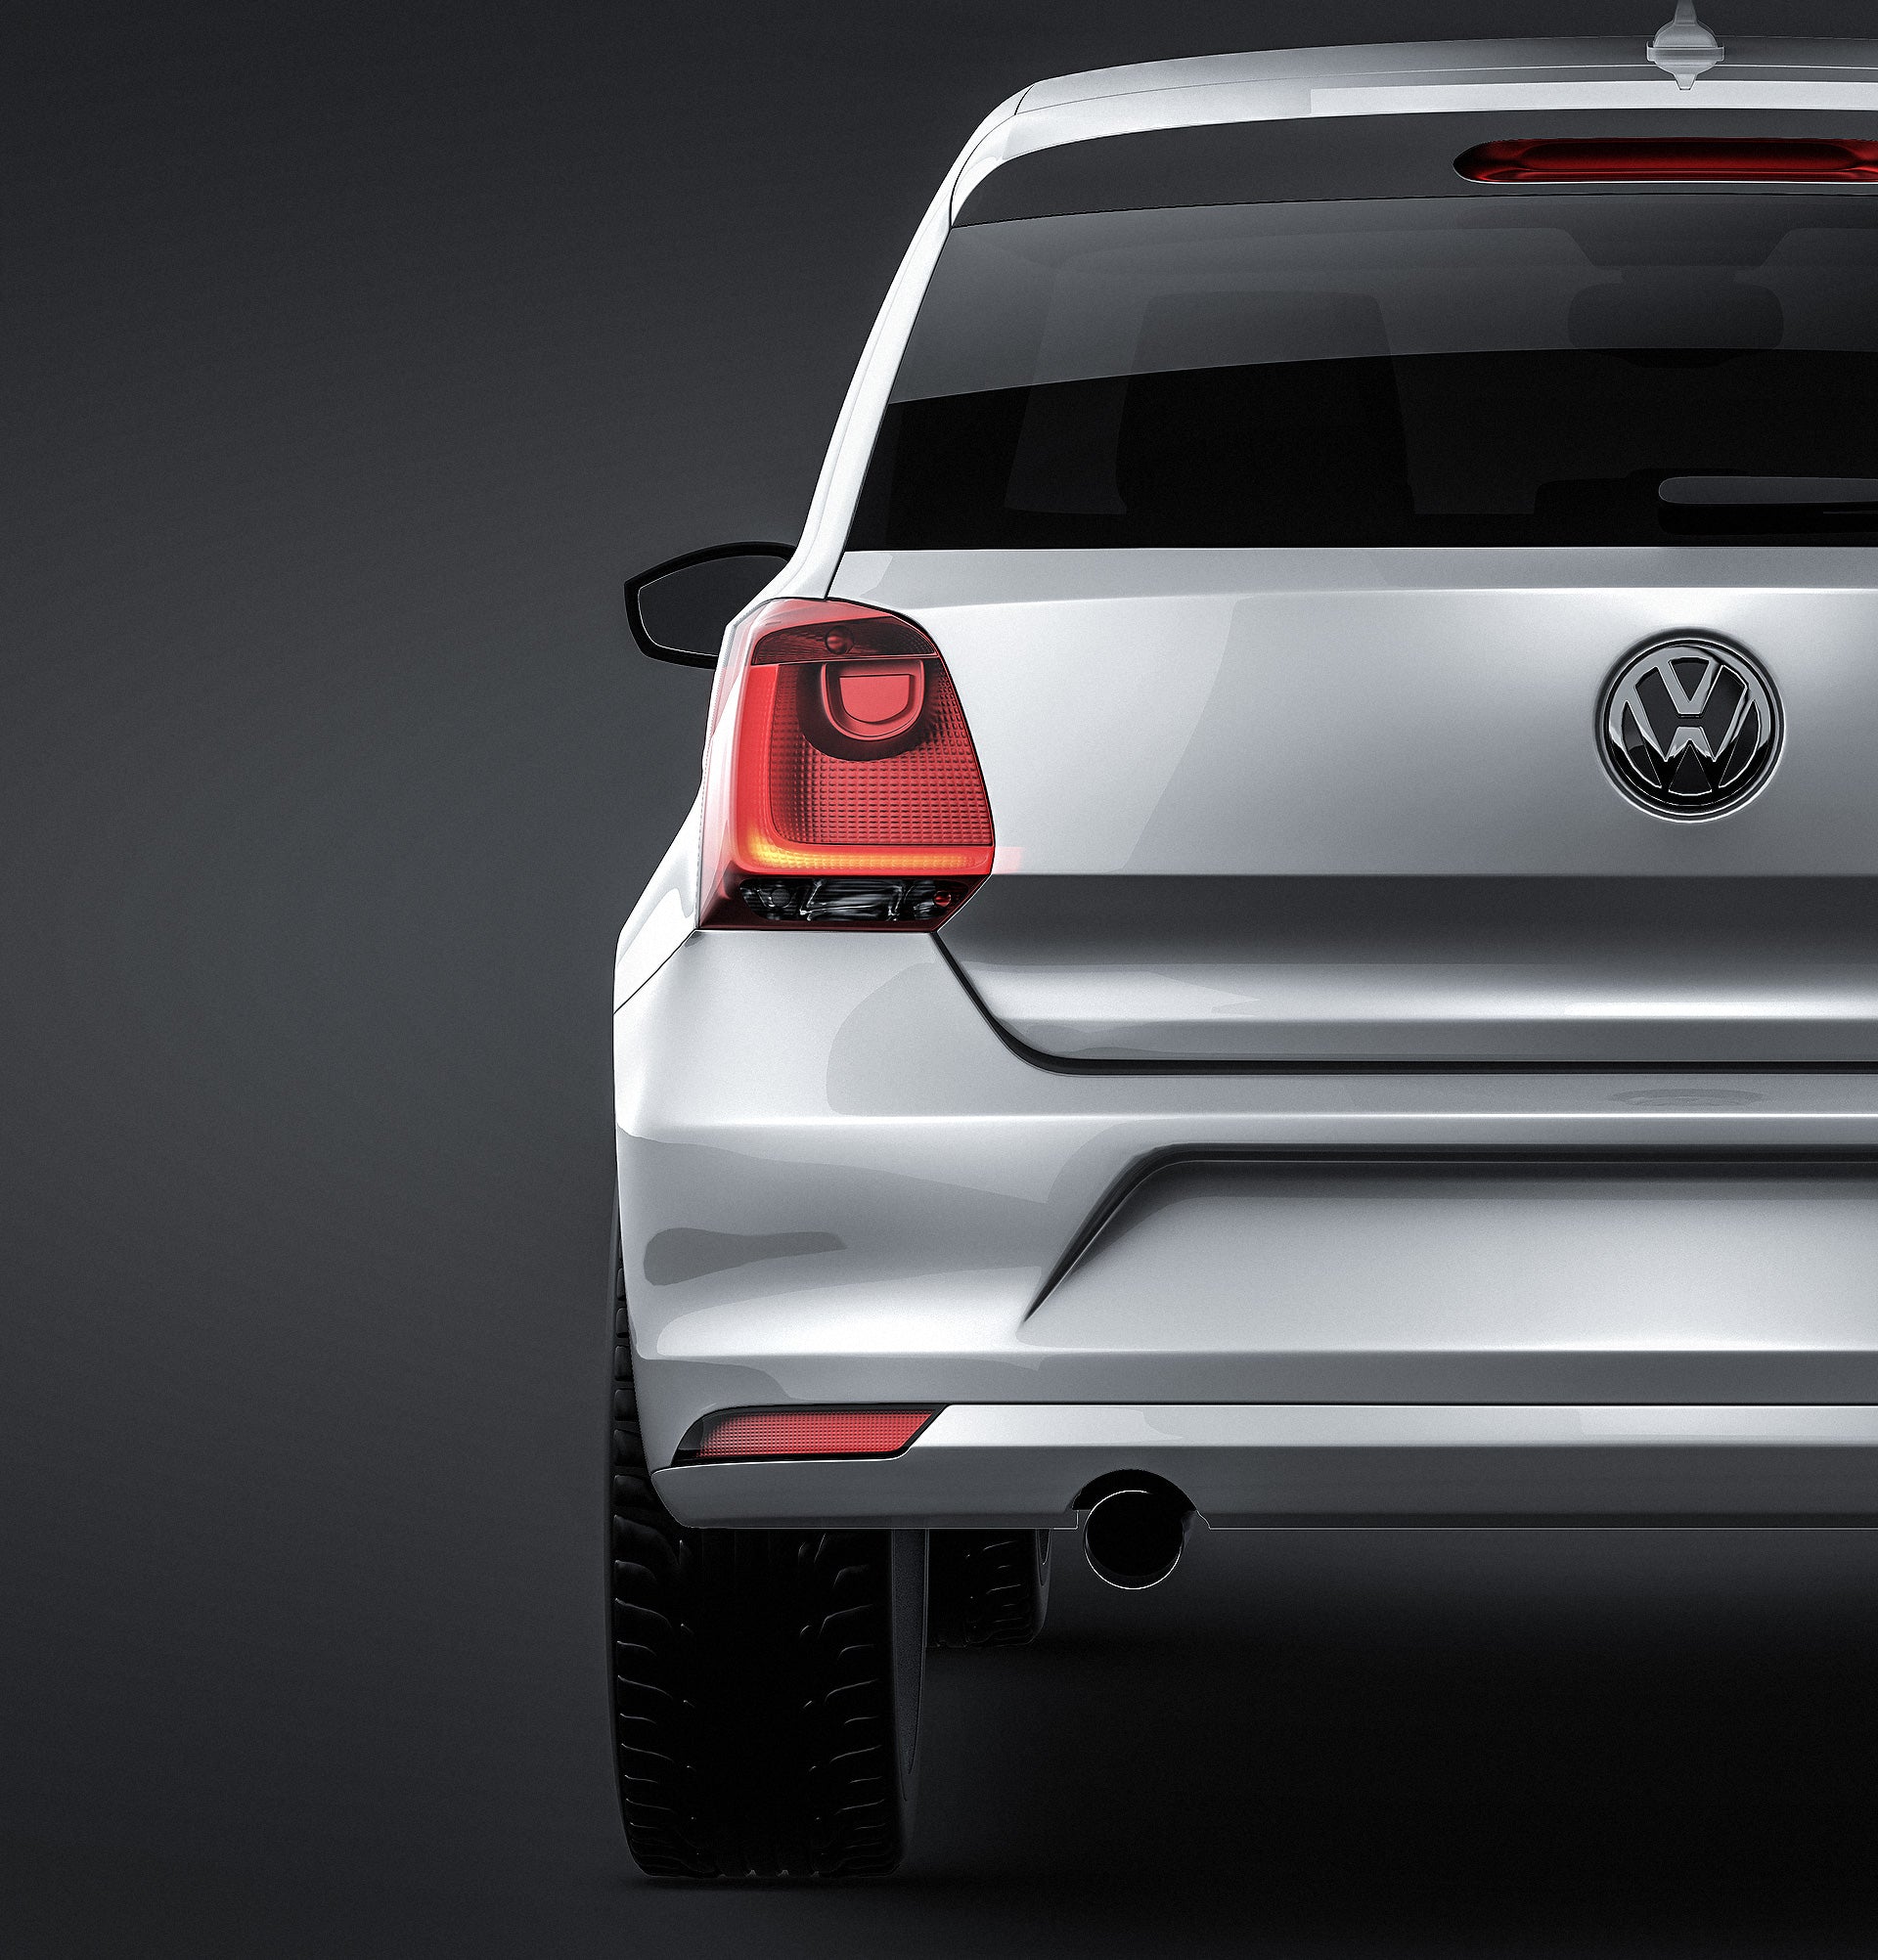 Volkswagen Polo 5-door 2015 glossy finish - all sides Car Mockup Template.psd